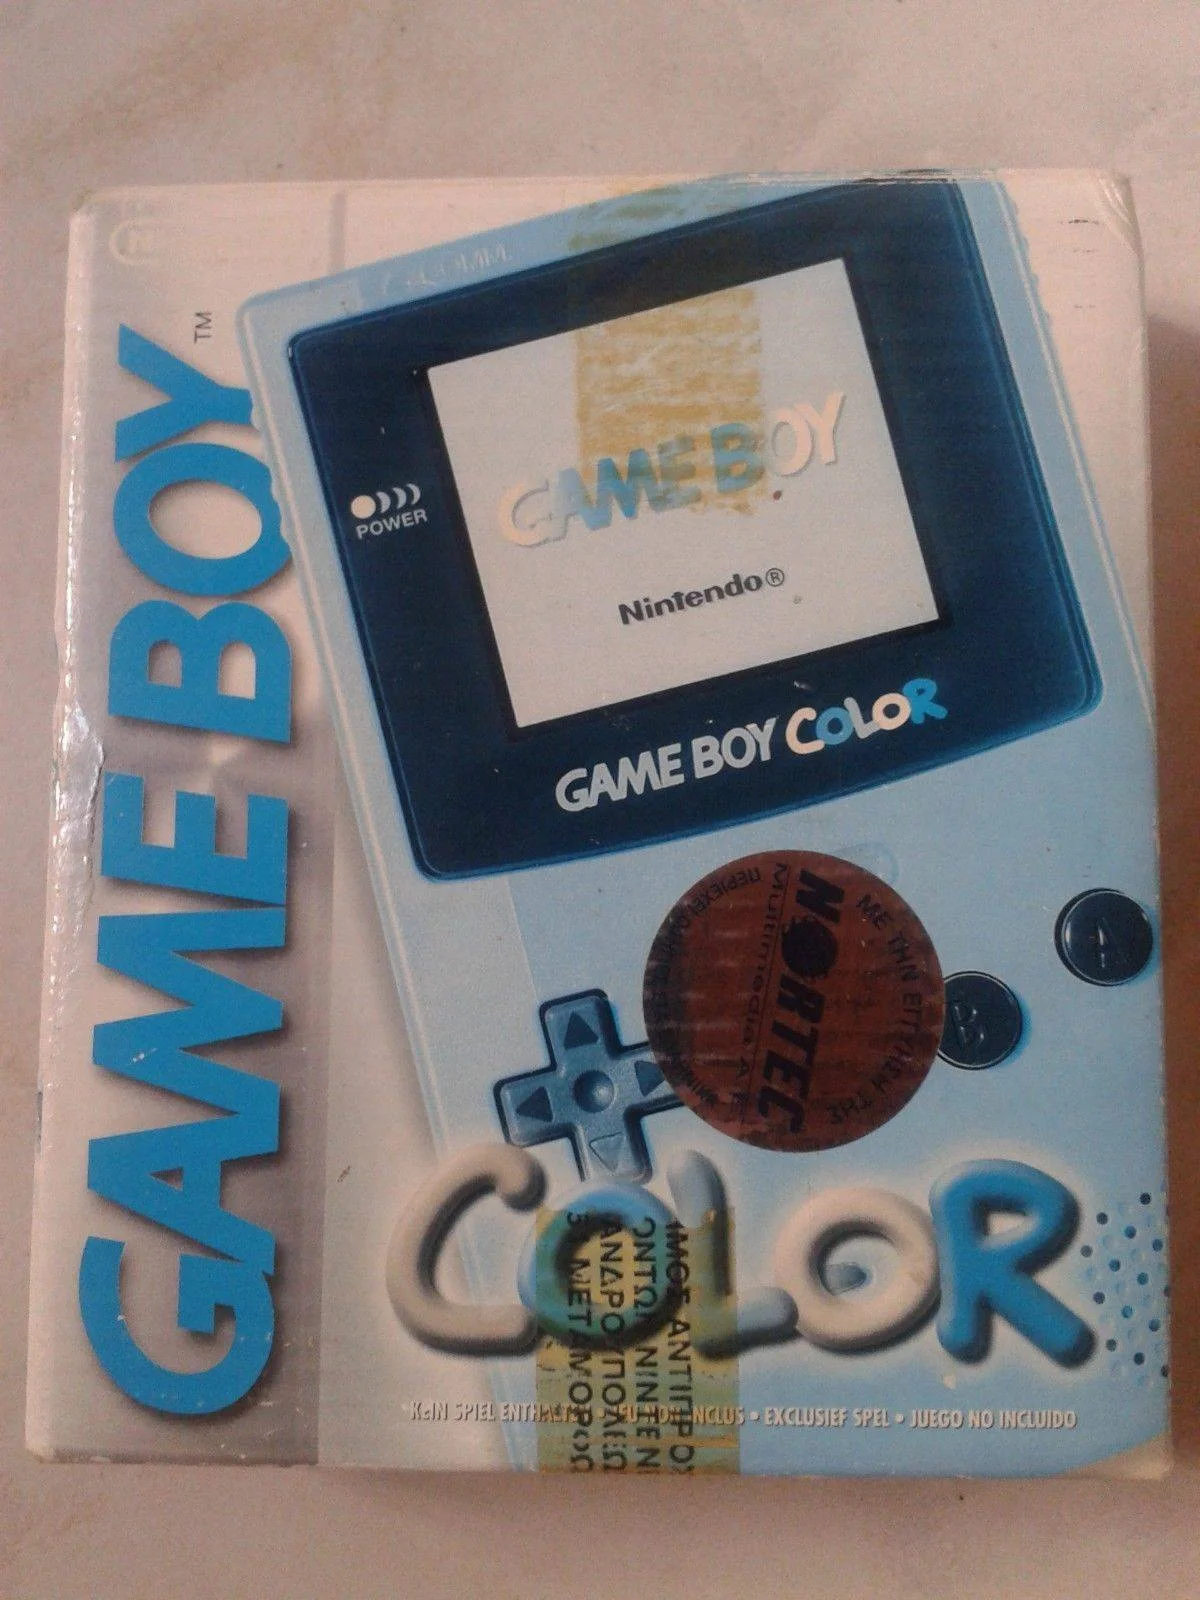 Which color did this Gameboy have originally?